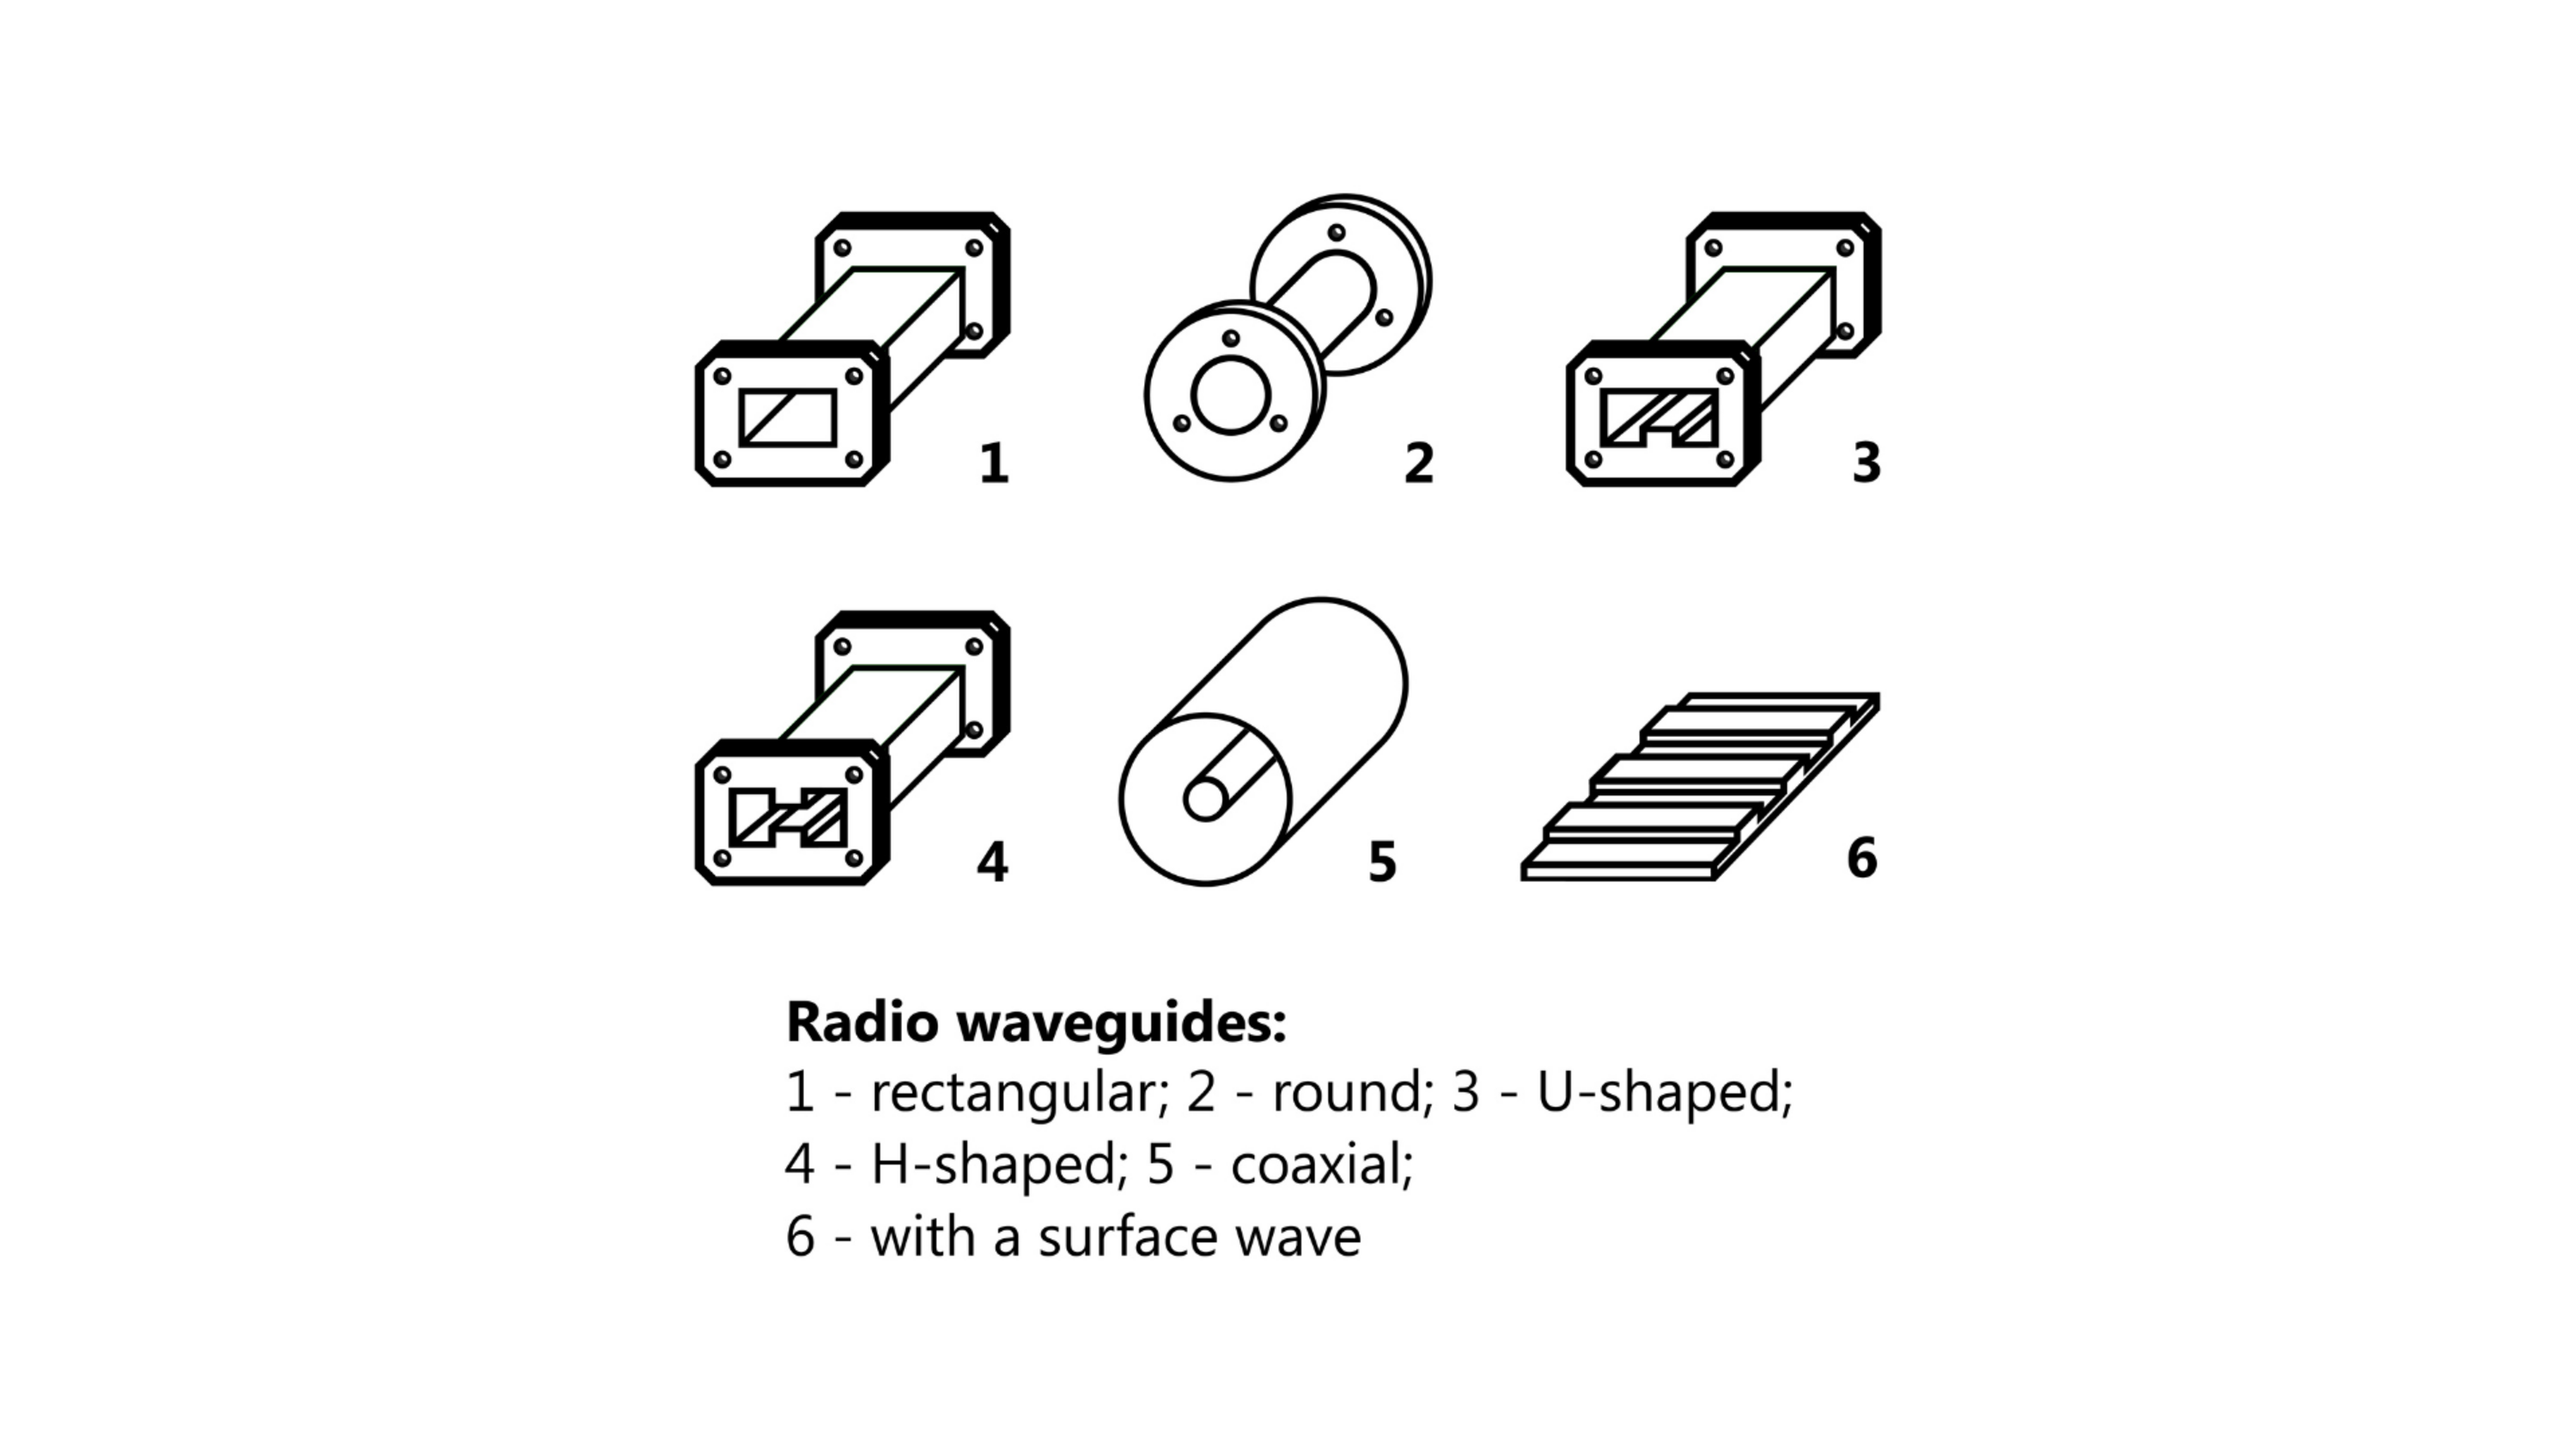 drawing of six different types of waveguides (1. rectangular, 2. round, 3. u-shaped, 4. h-shaped, 5. coaxial, 6. with a surface wave) 